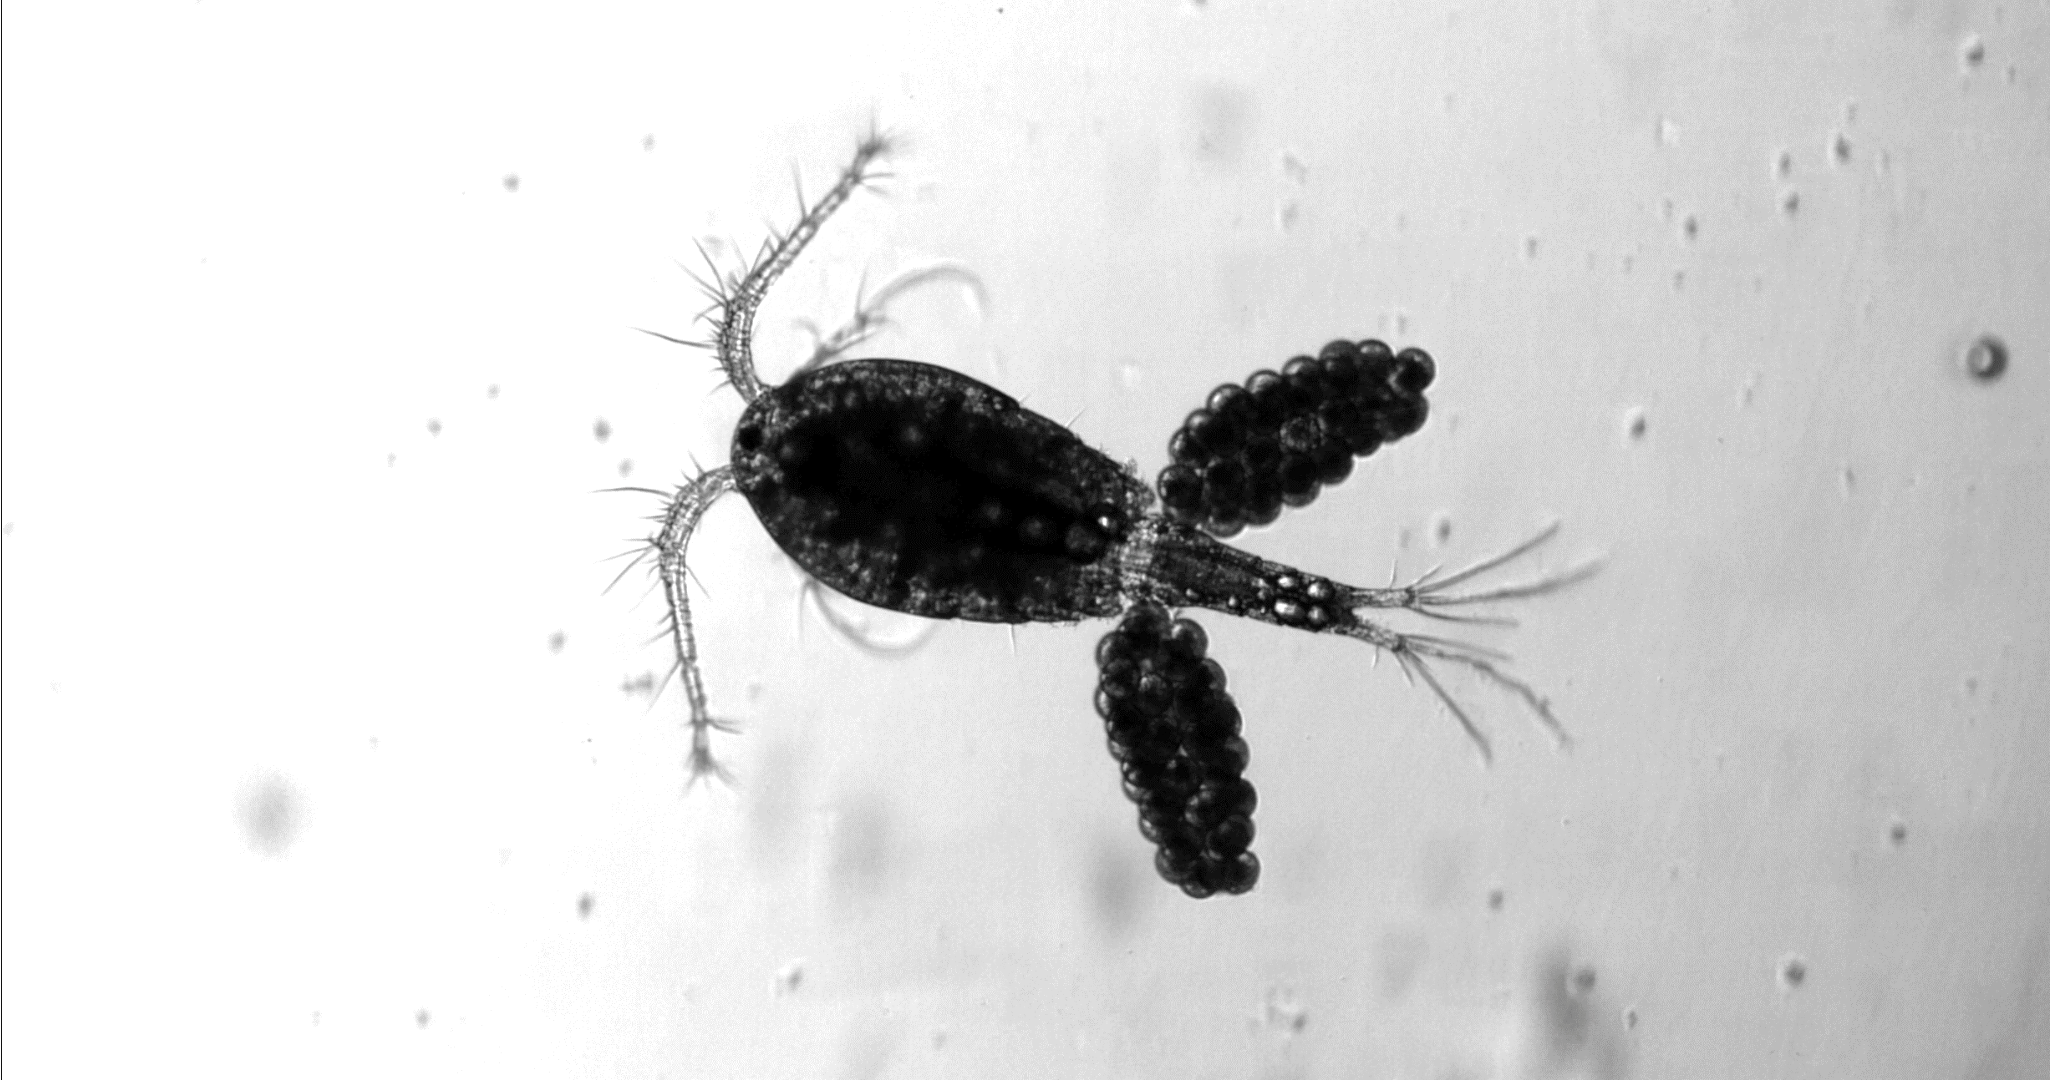 An example of a copepod that Griffin studies in his research.